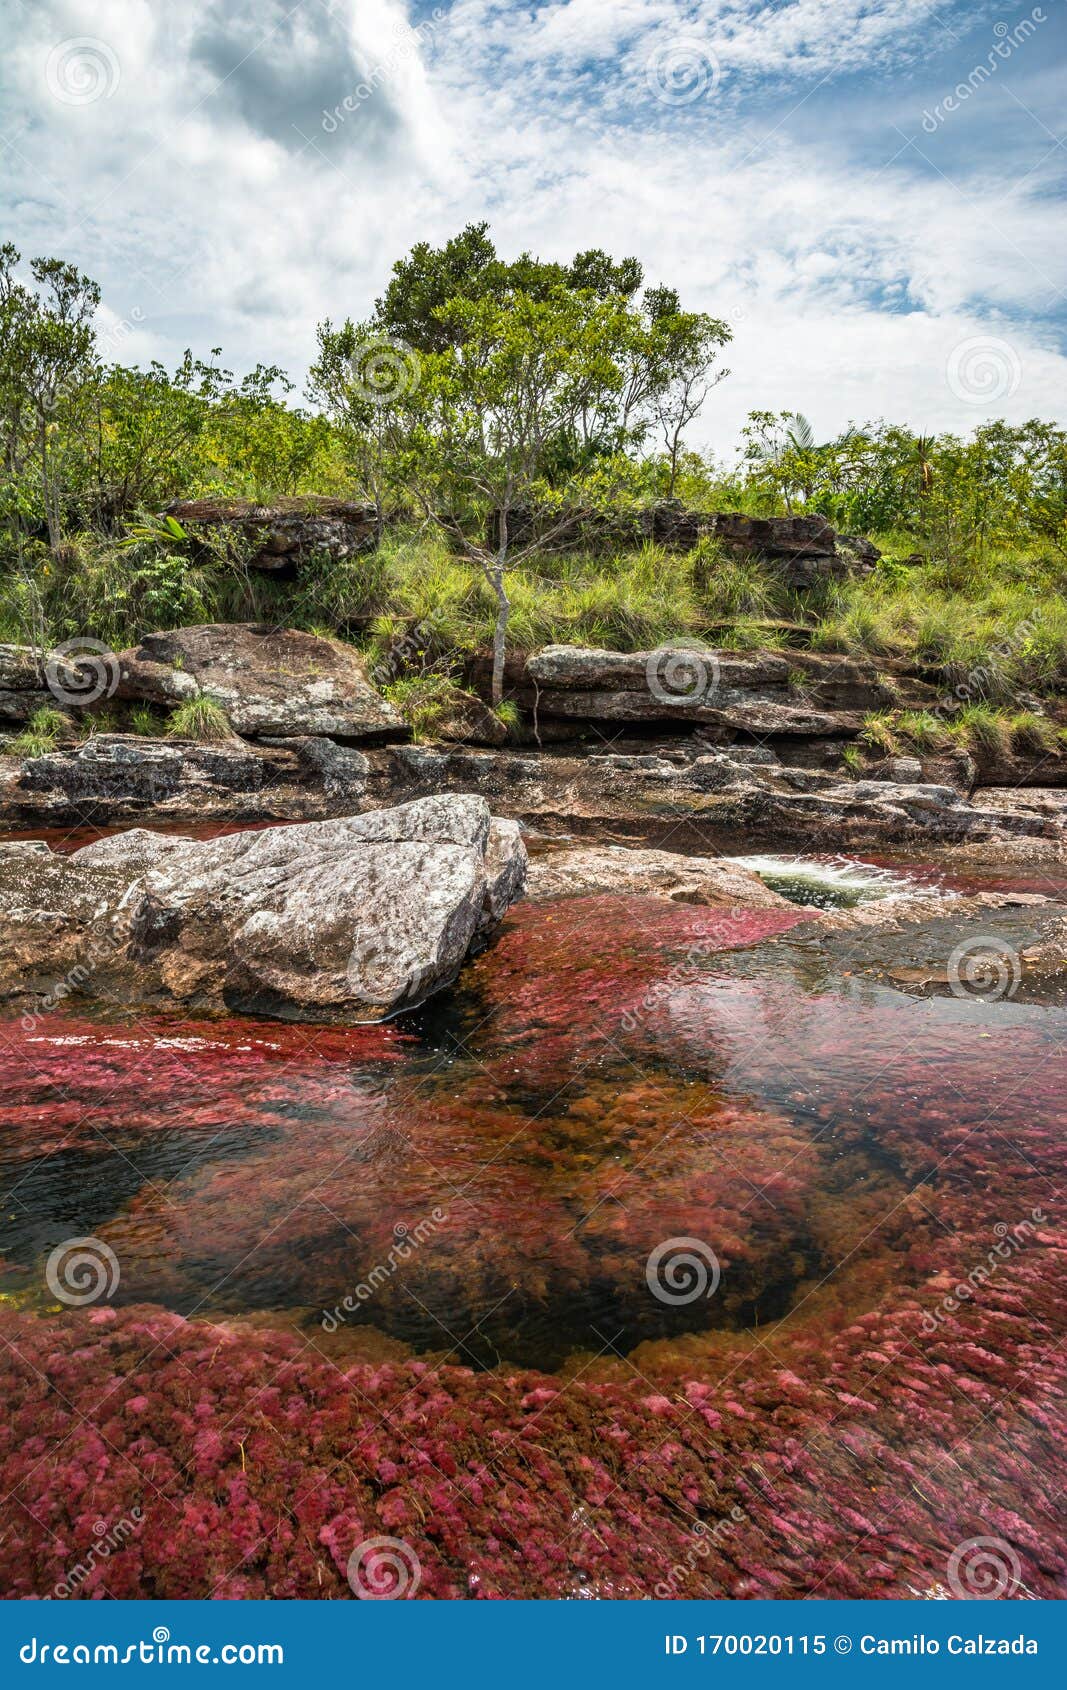 cano cristales the most beautiful river in the world